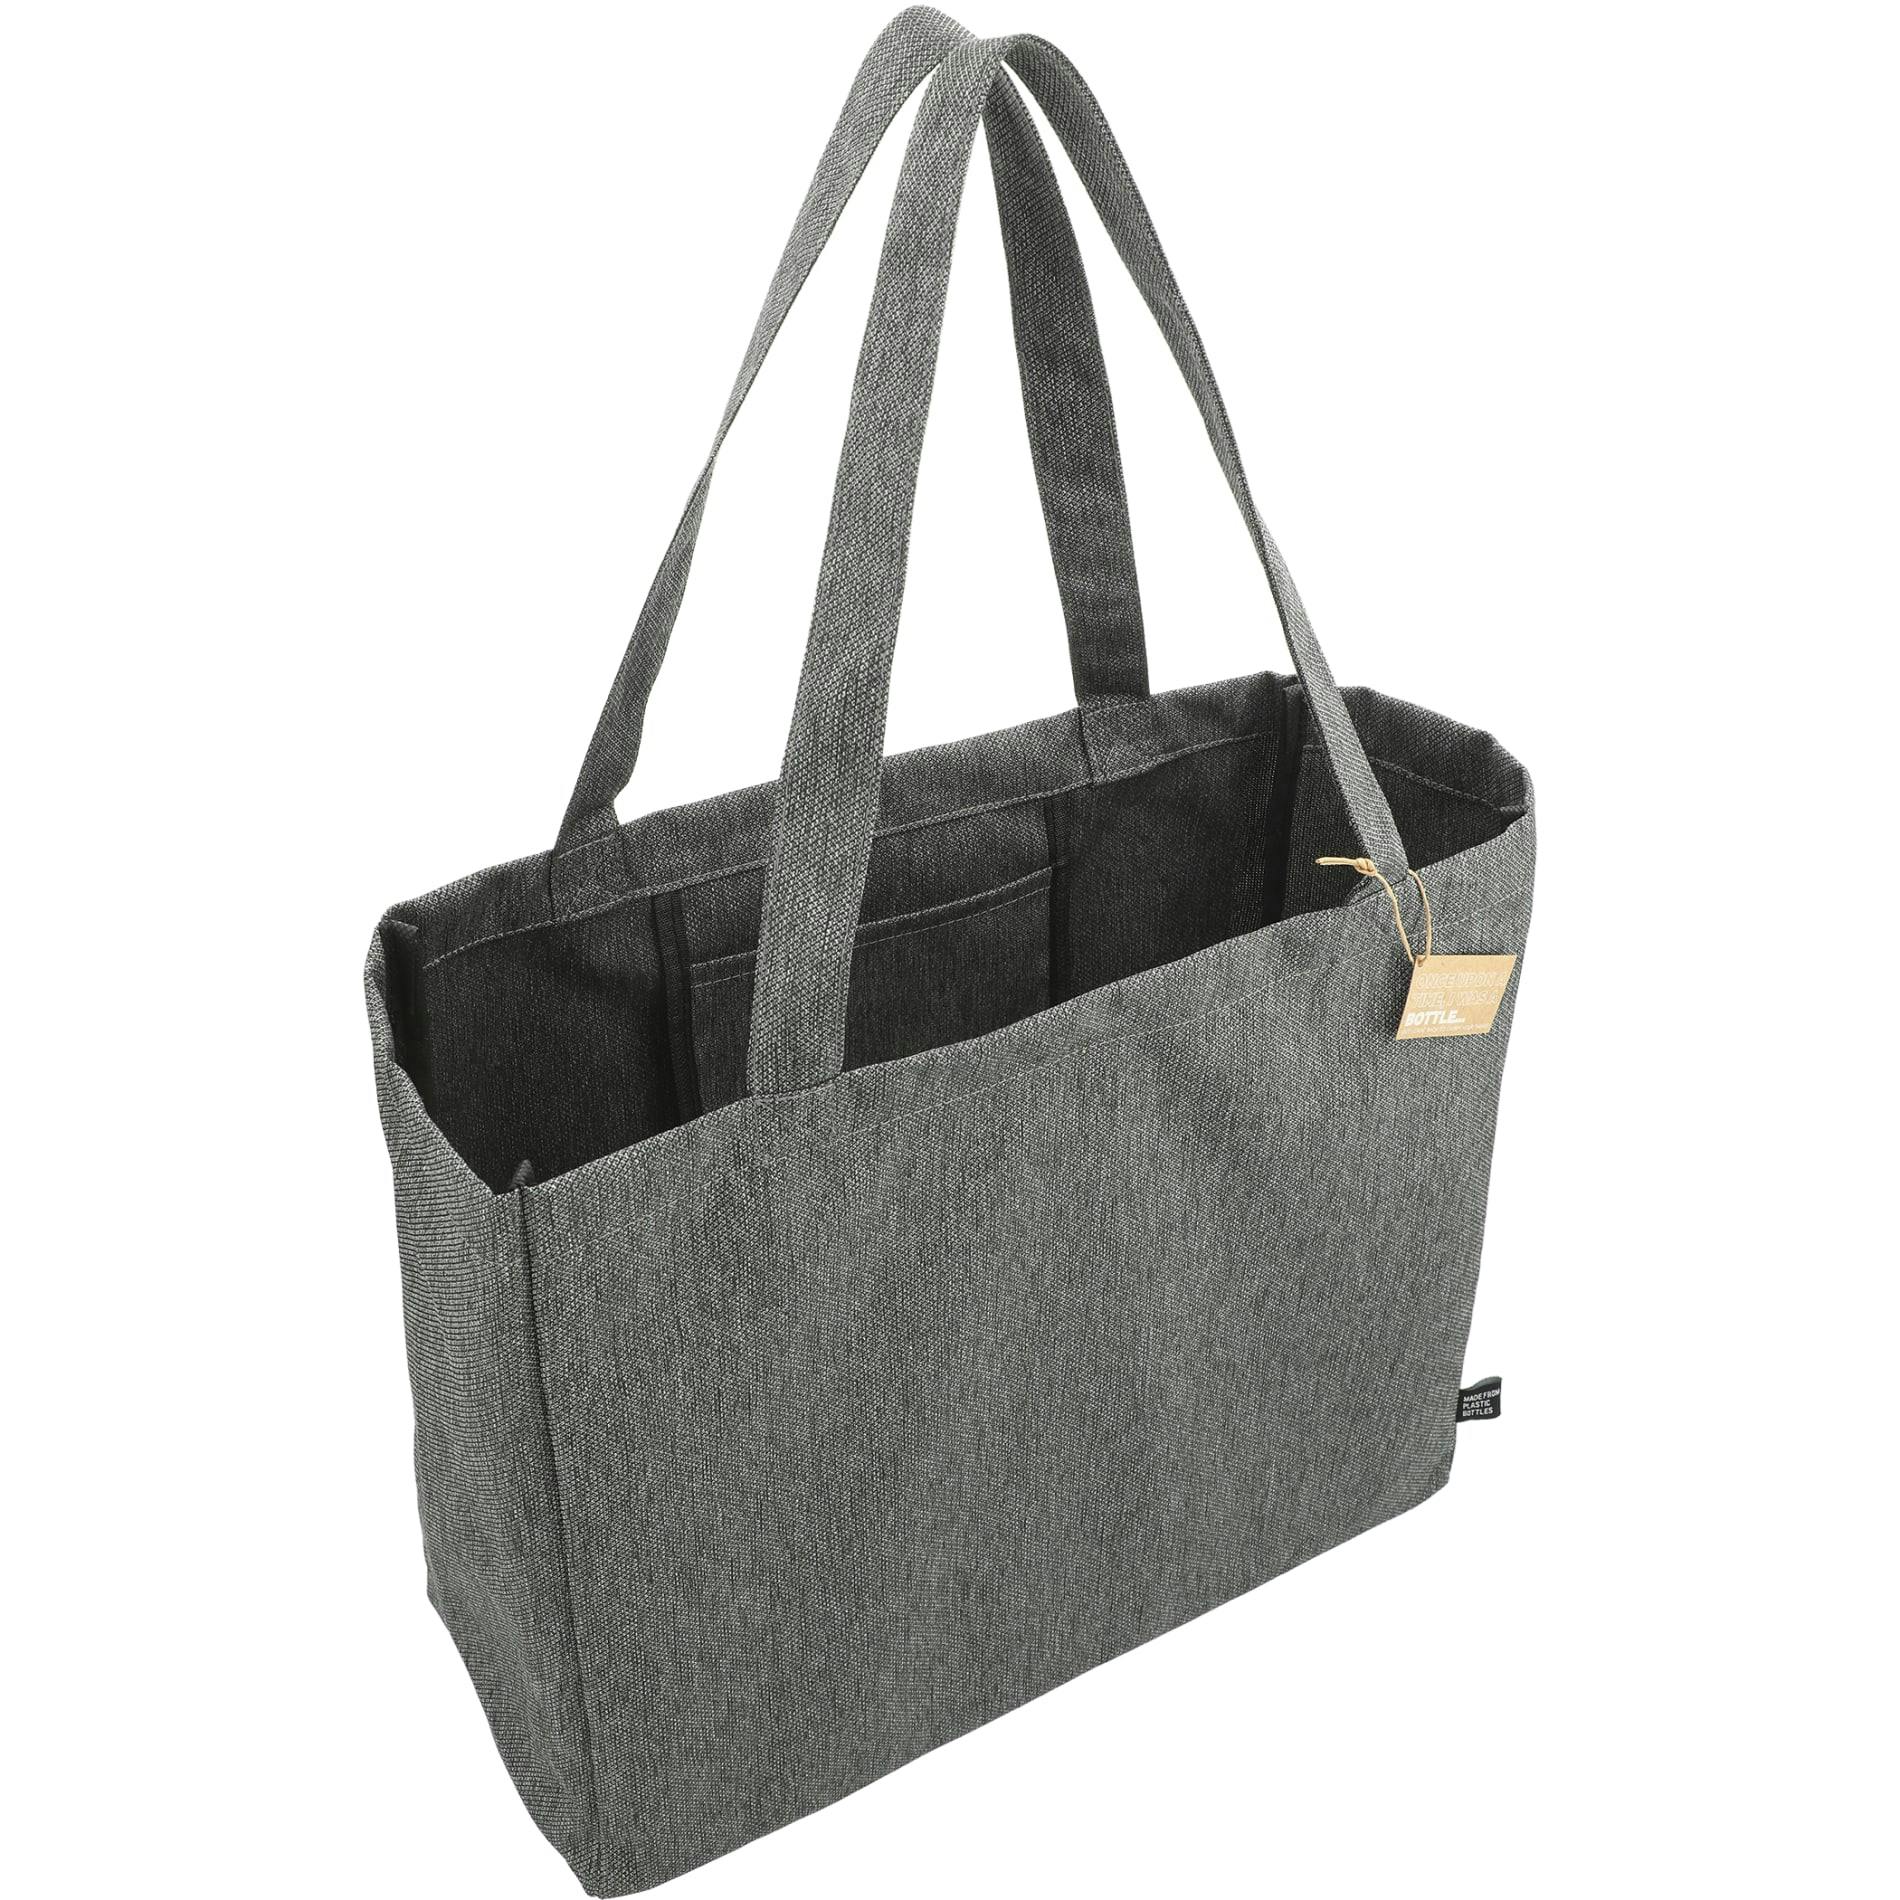 Vila Recycled All-Purpose Tote - additional Image 7